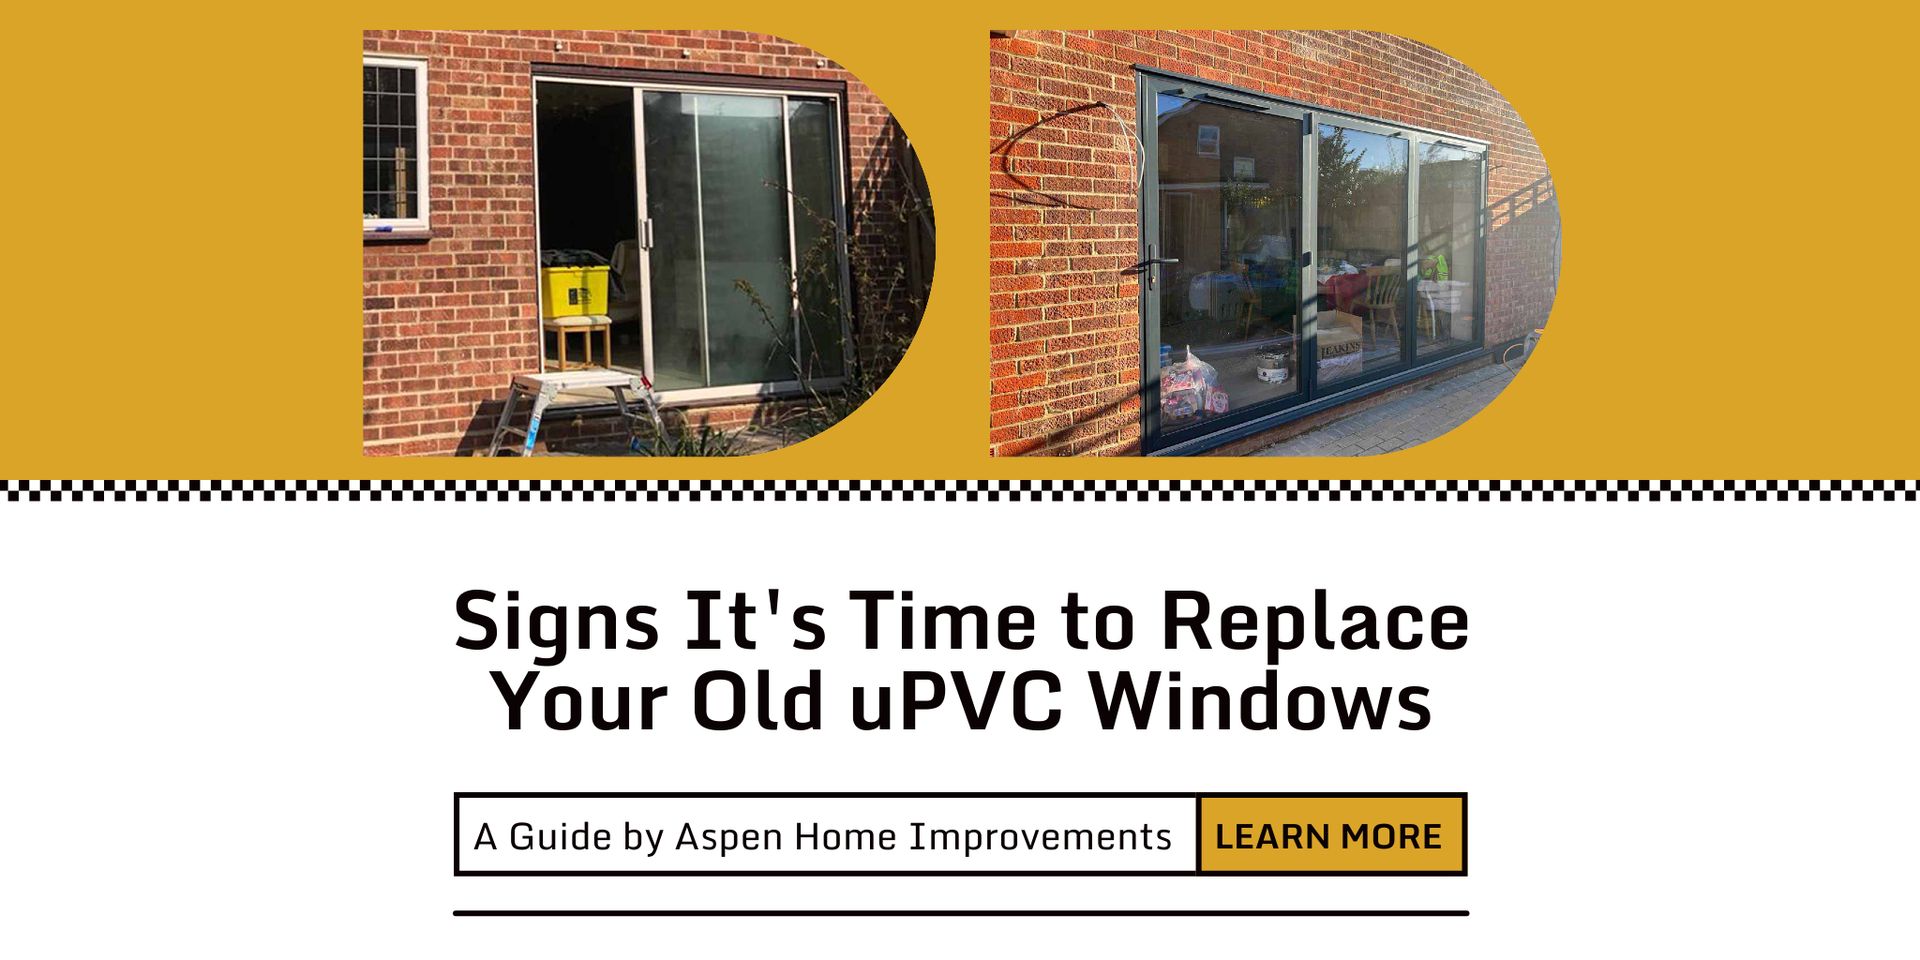 Signs It's Time to Replace Your Old uPVC Windows